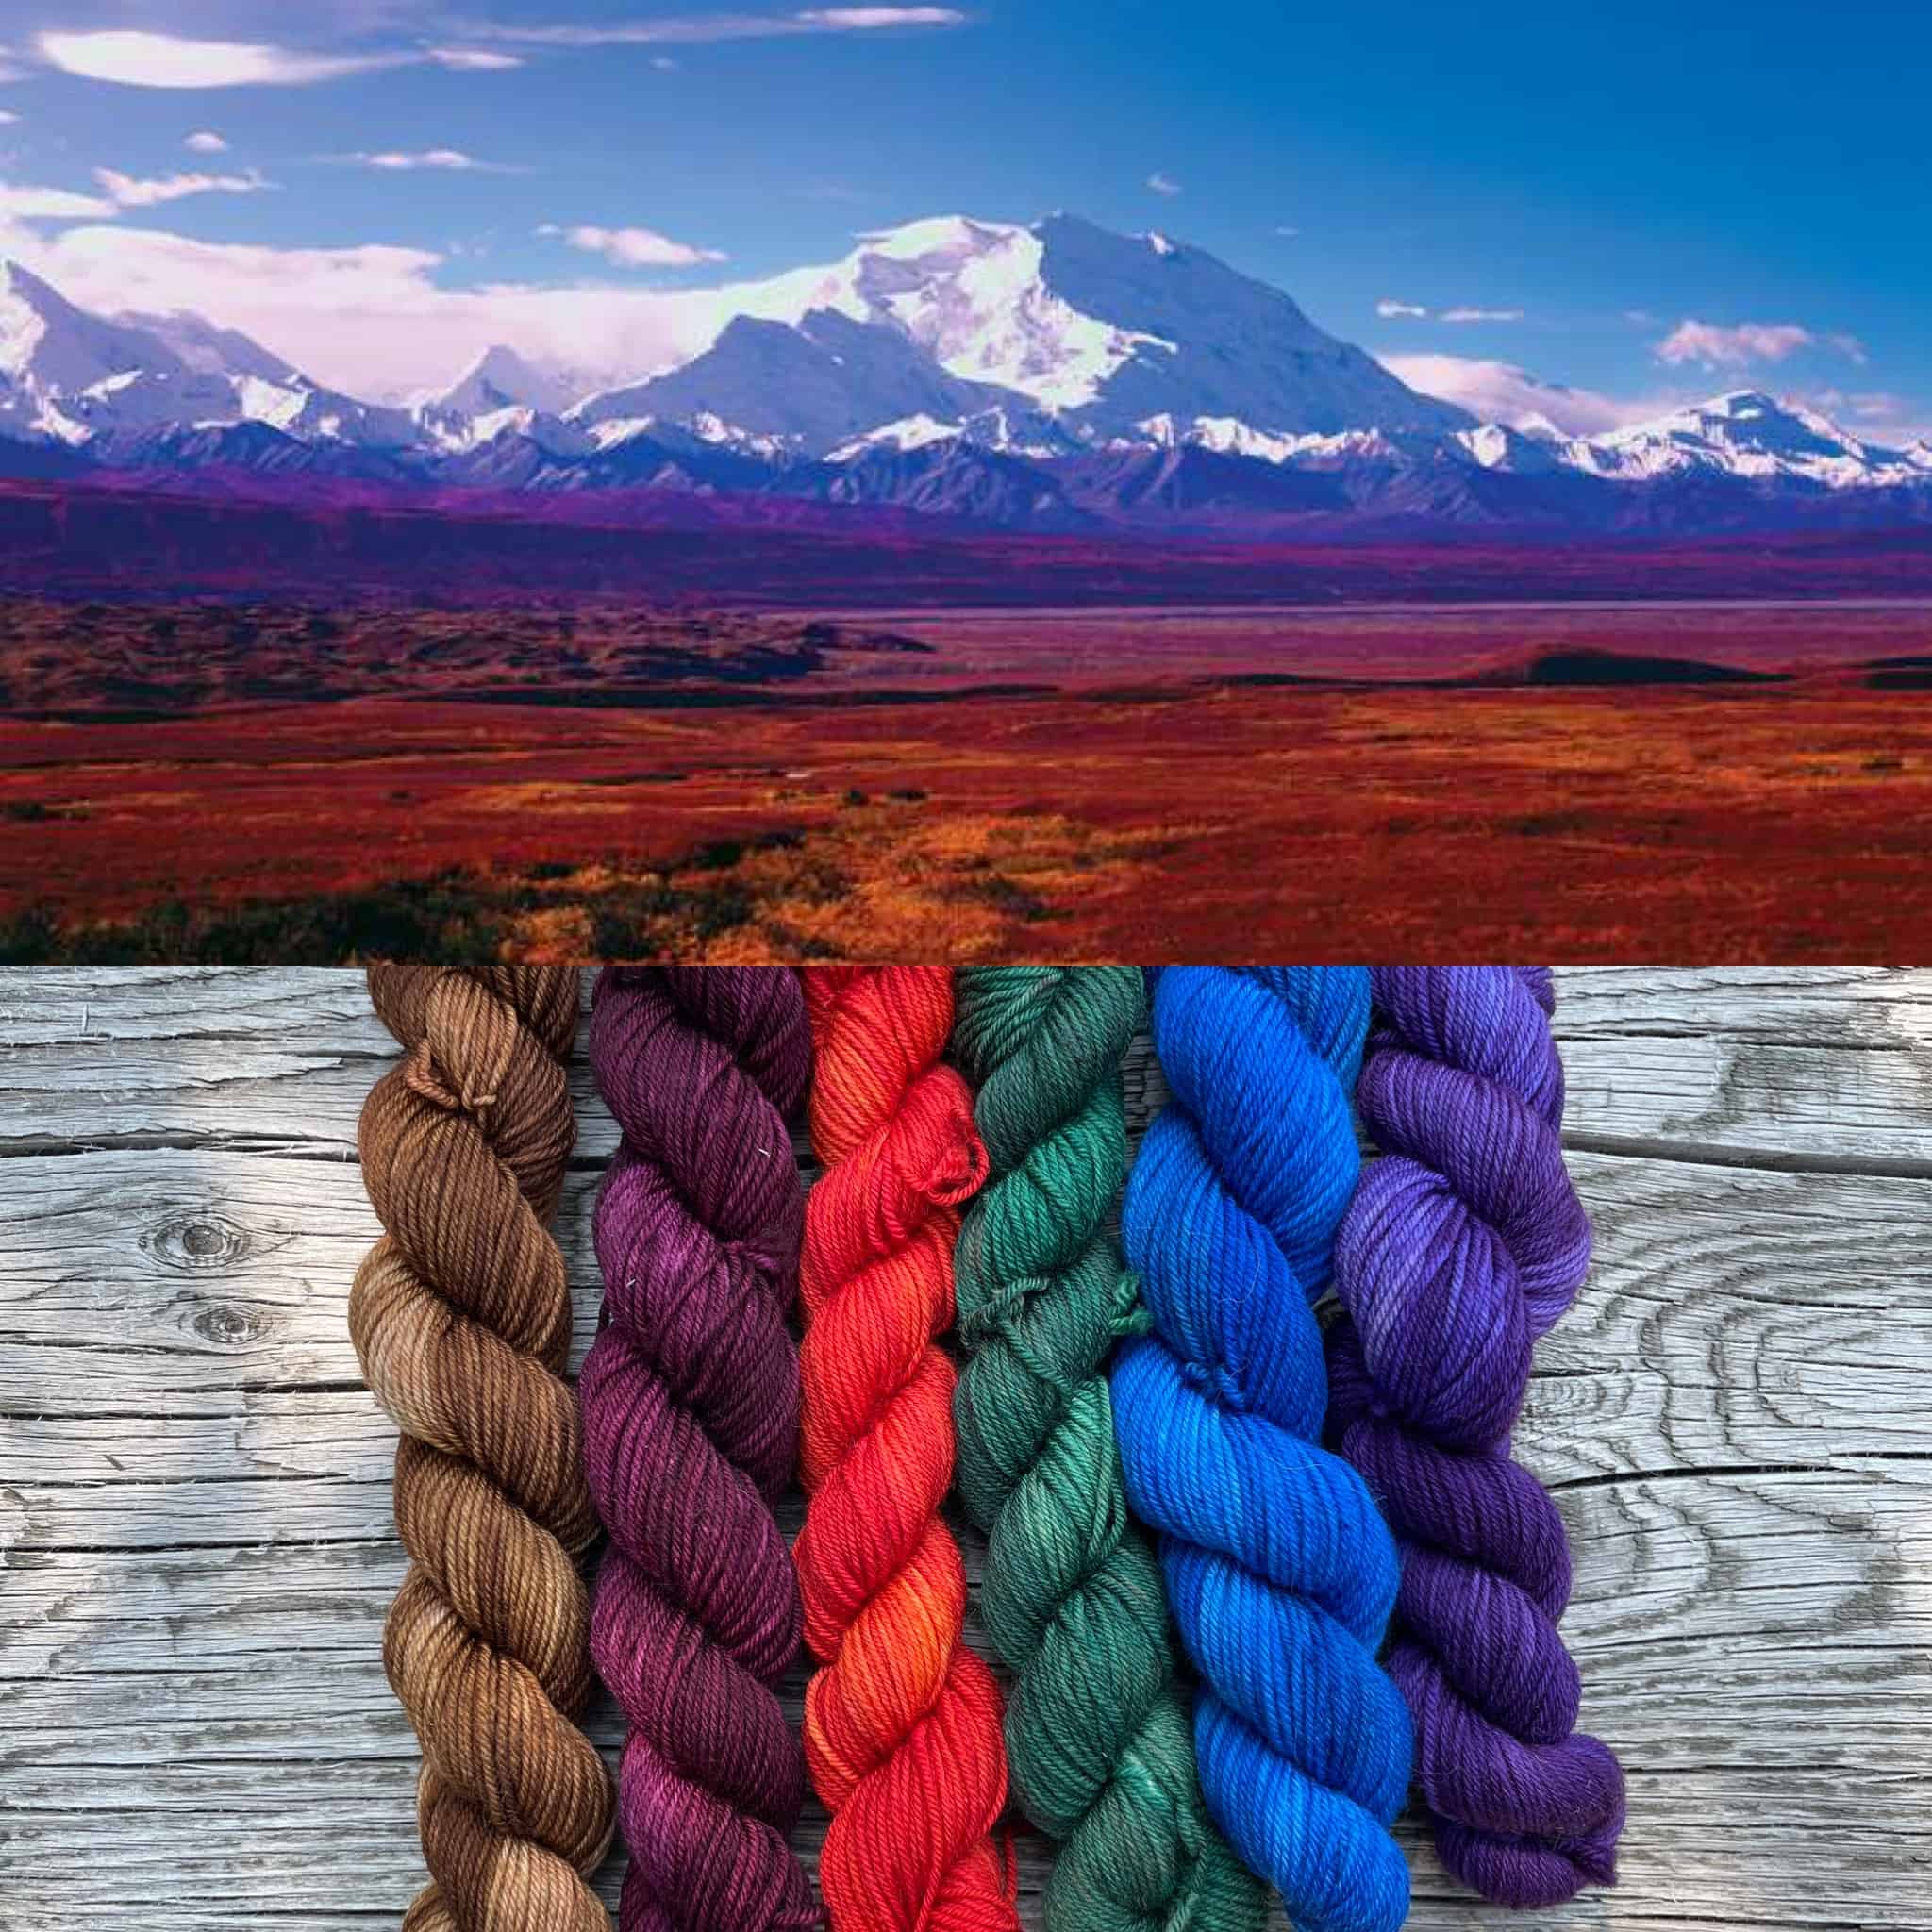 A snow-covered mountain and skeins of brown, plum, red, green, blue and purple yarn.